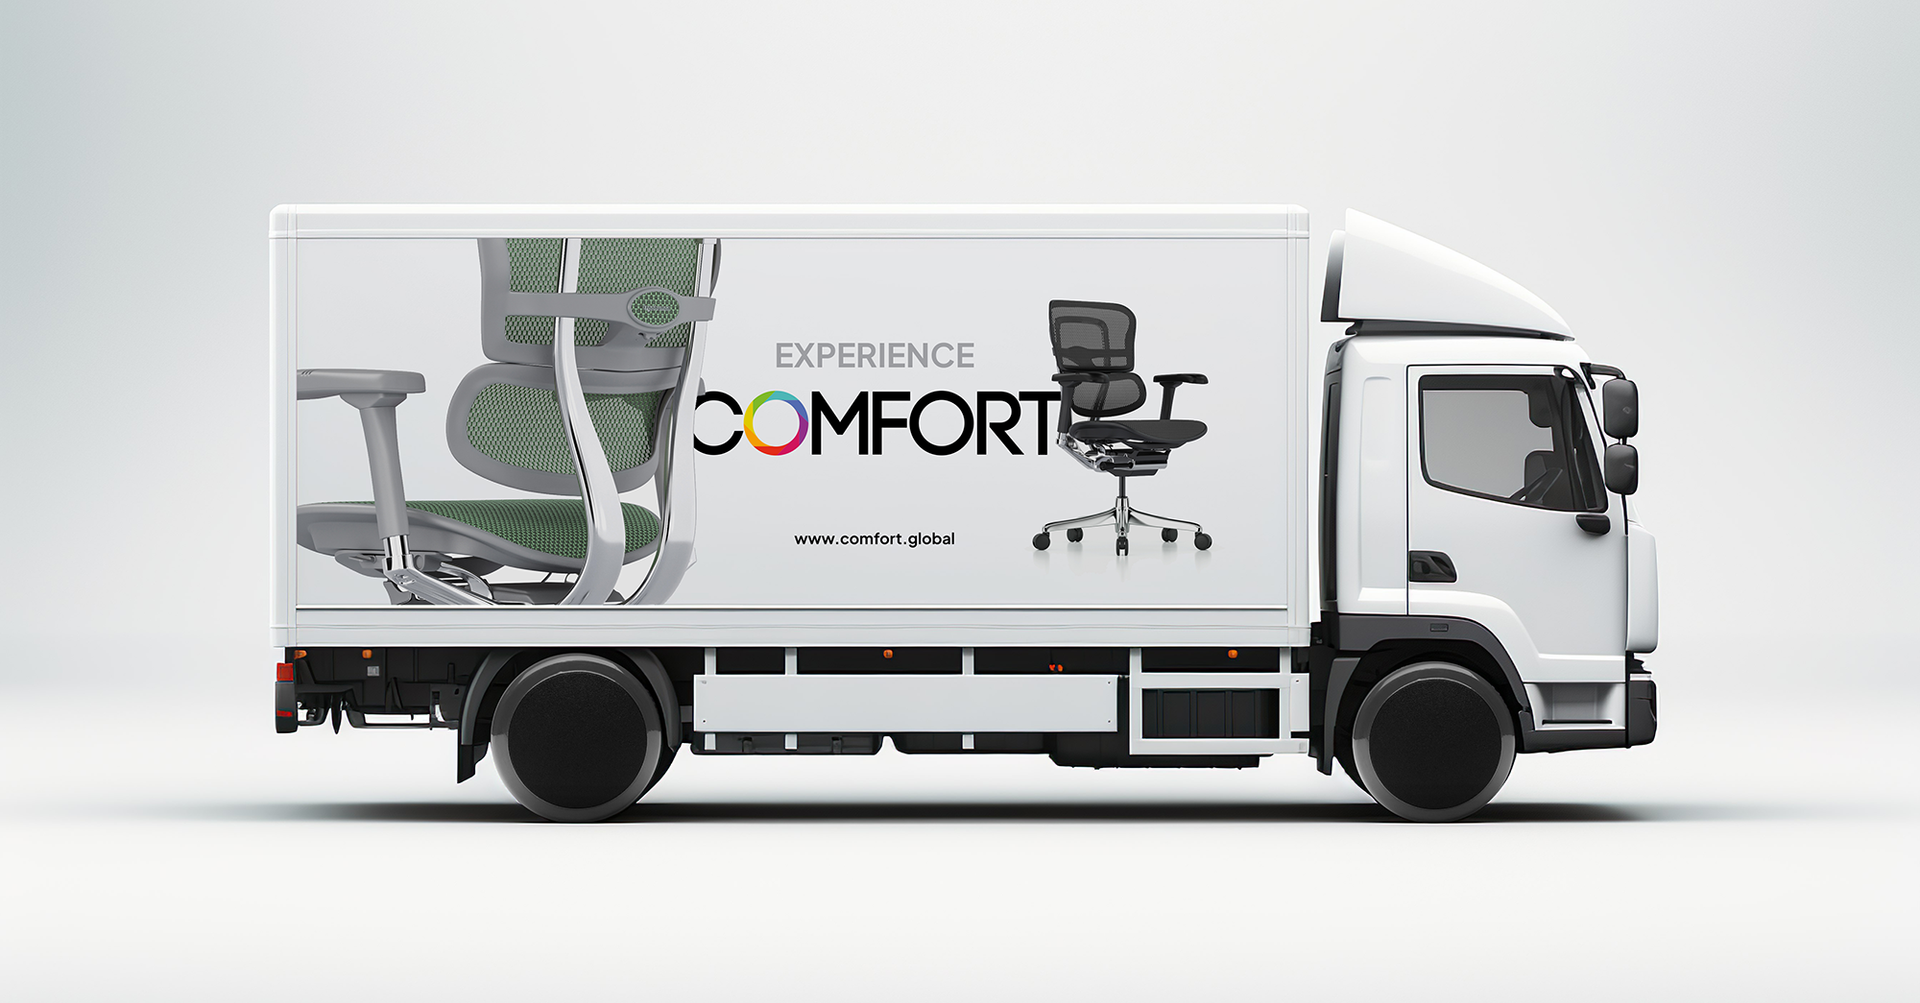 Rendered image of a white lorry, with the word 'experience comfort' on the side, featuring two Ergohuman chairs, one in green, and one black. The wheels of the lorry are chair castors to tie in the chair imagery. The chair is on a white background. 